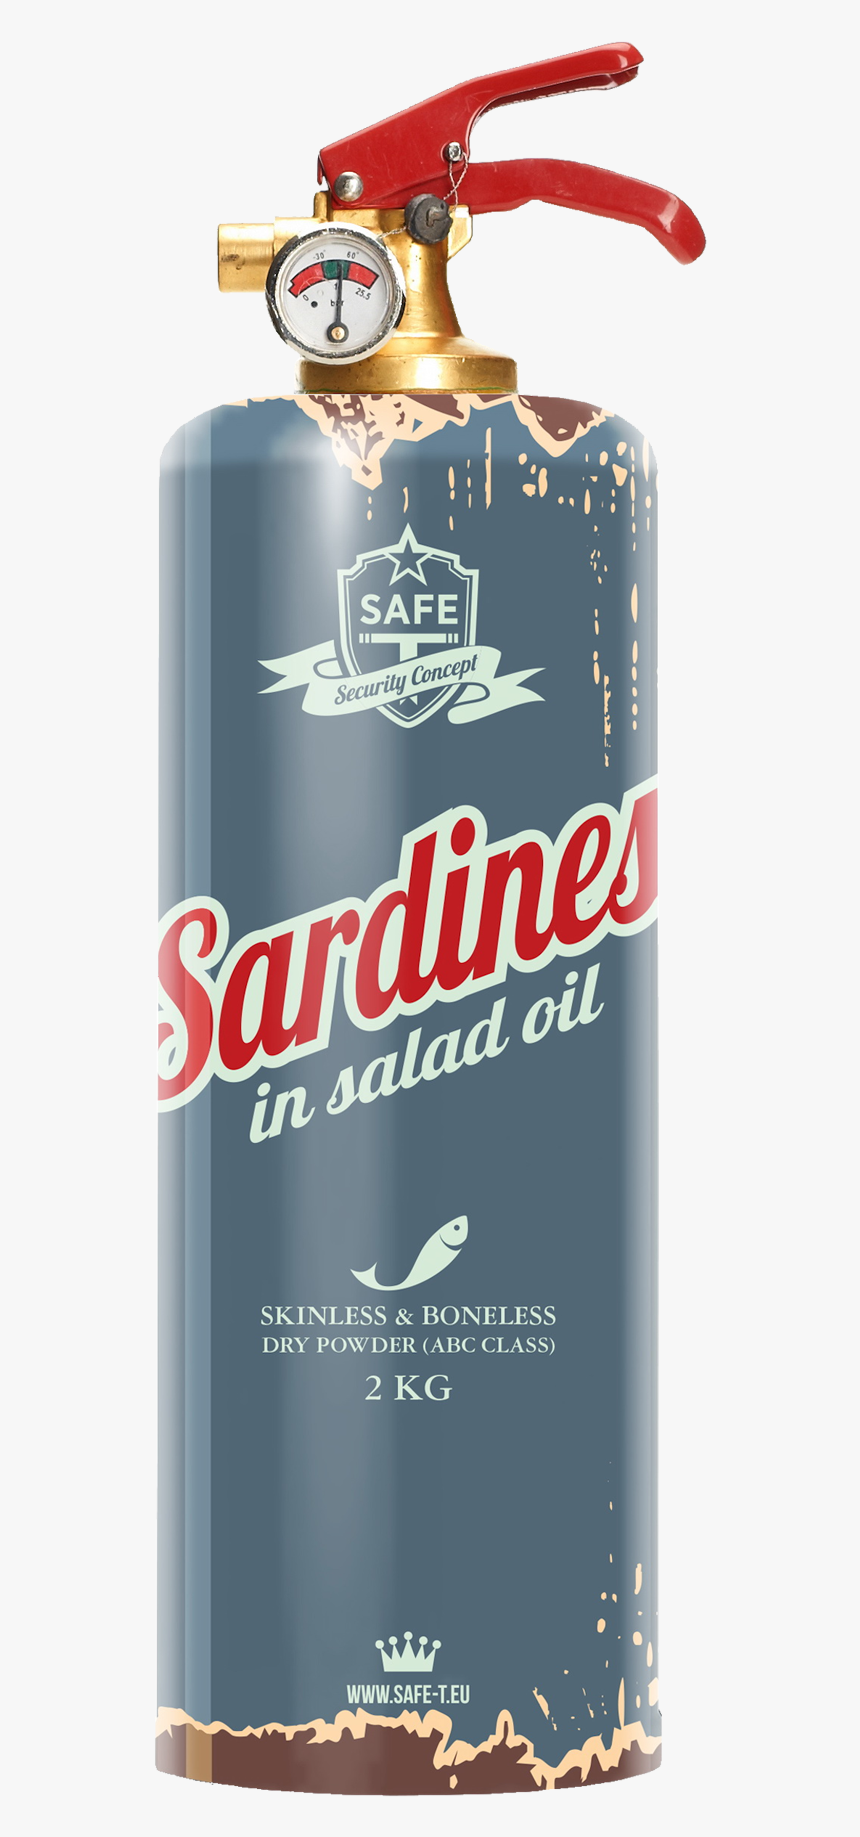 Design Fire Extinguisher Sardines - Guinness, HD Png Download, Free Download